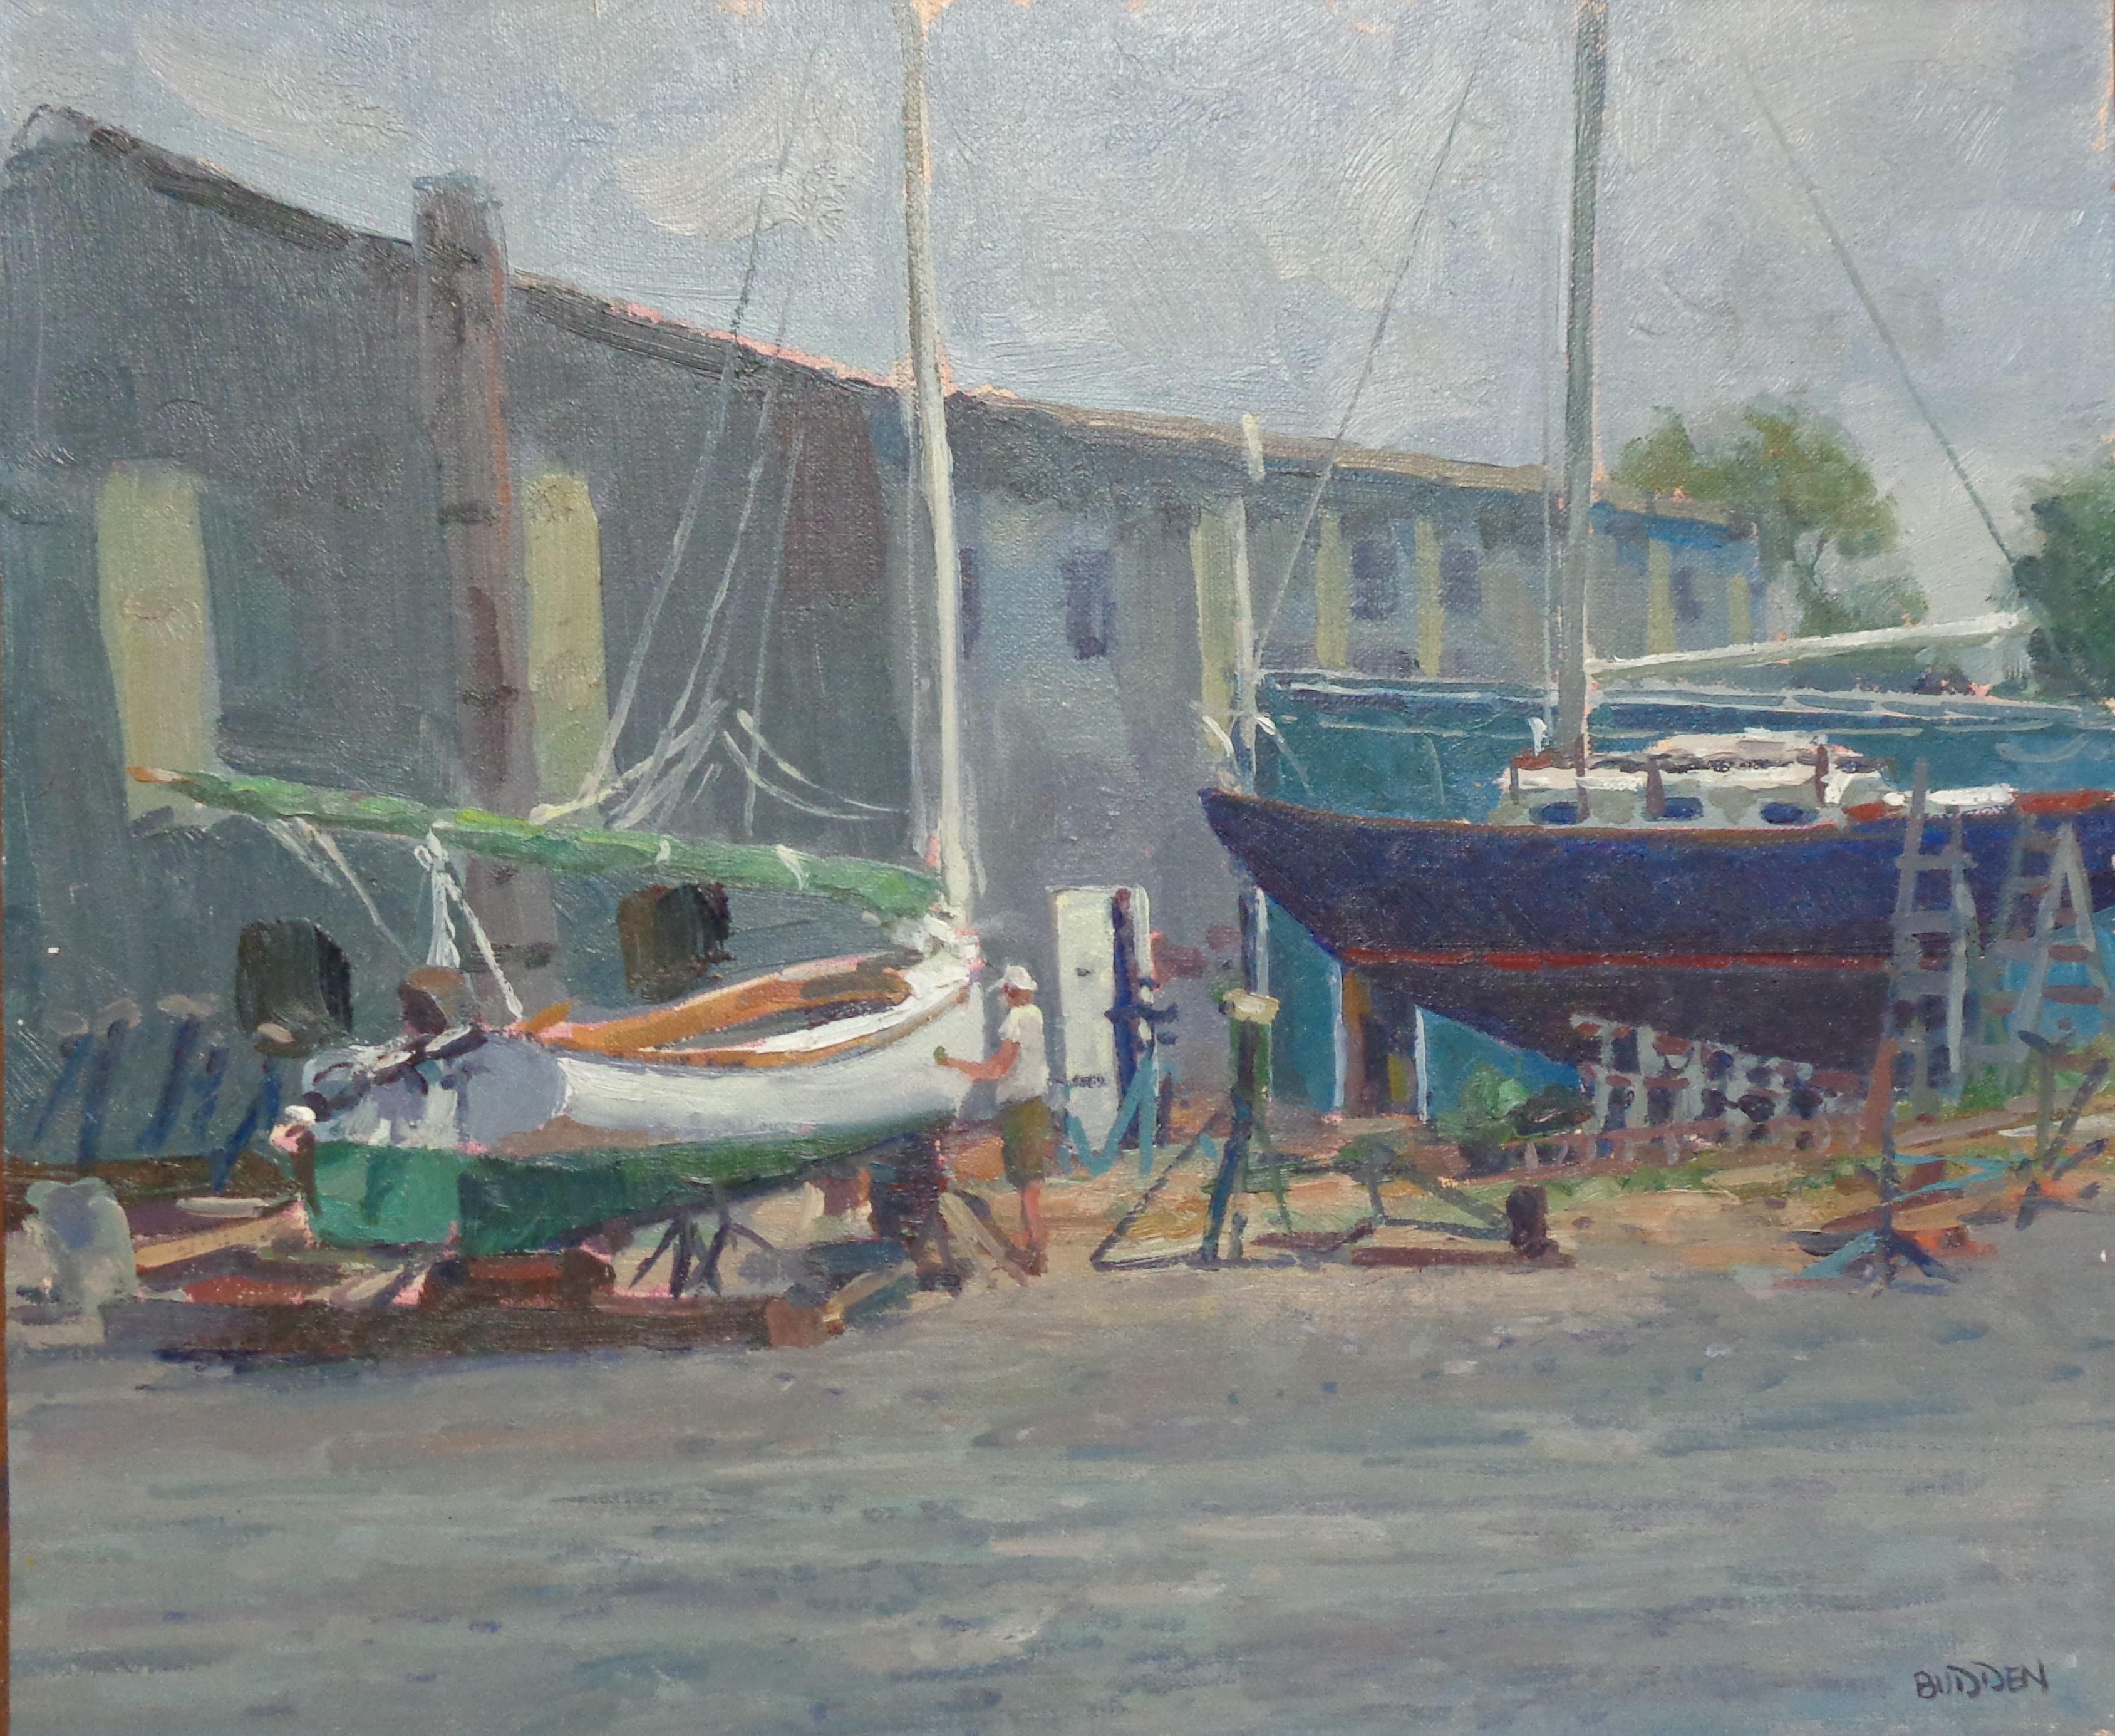 Lowery's Legacy  is a plein air oil painting on canvas panel by award winning contemporary artist Michael Budden that showcases a view of someone working on his boat at Lowery's Boat Yard on Tilghman Island, Md . Painted on location  back in 2008